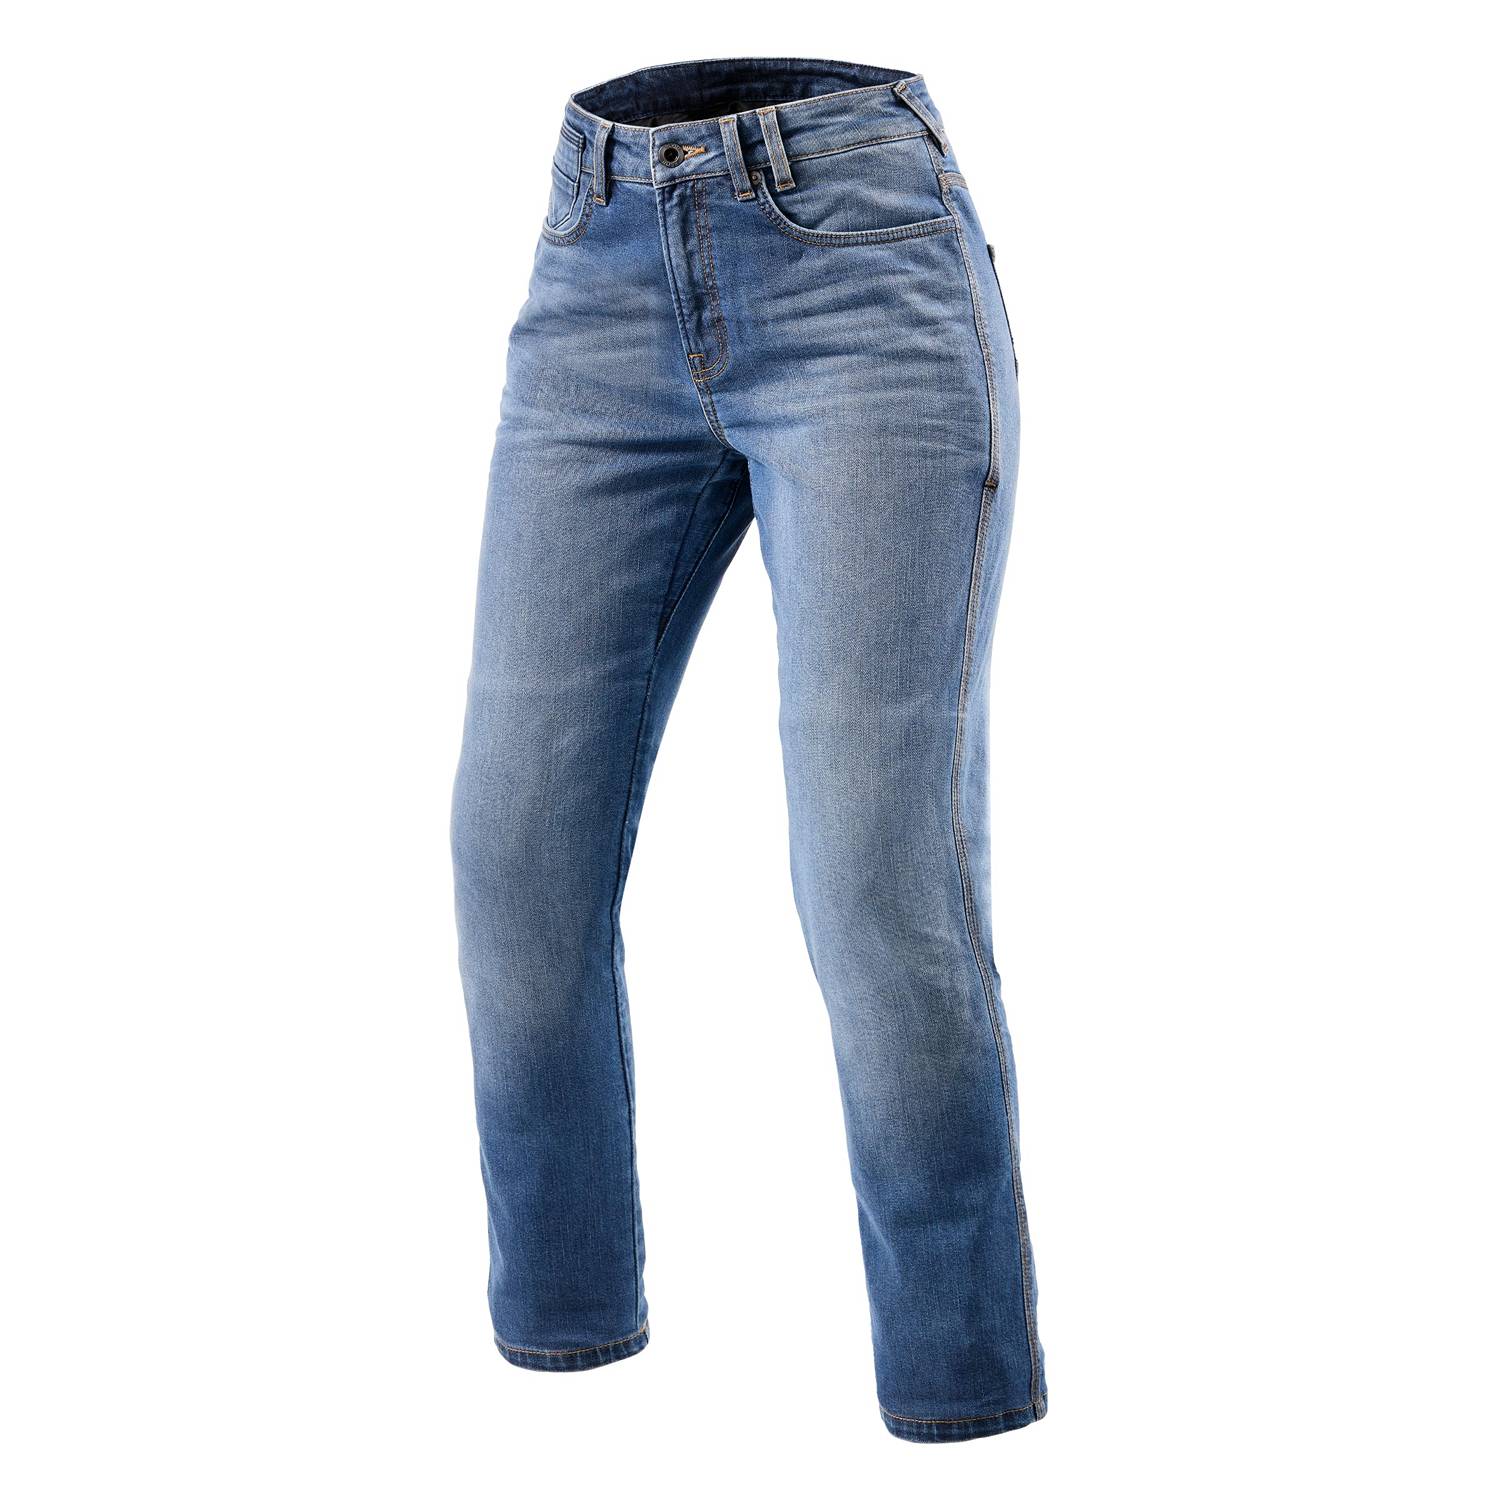 Image of REV'IT! Jeans Victoria 2 Ladies SF Classic Blue Used Motorcycle Jeans Size L32/W27 ID 8700001342810